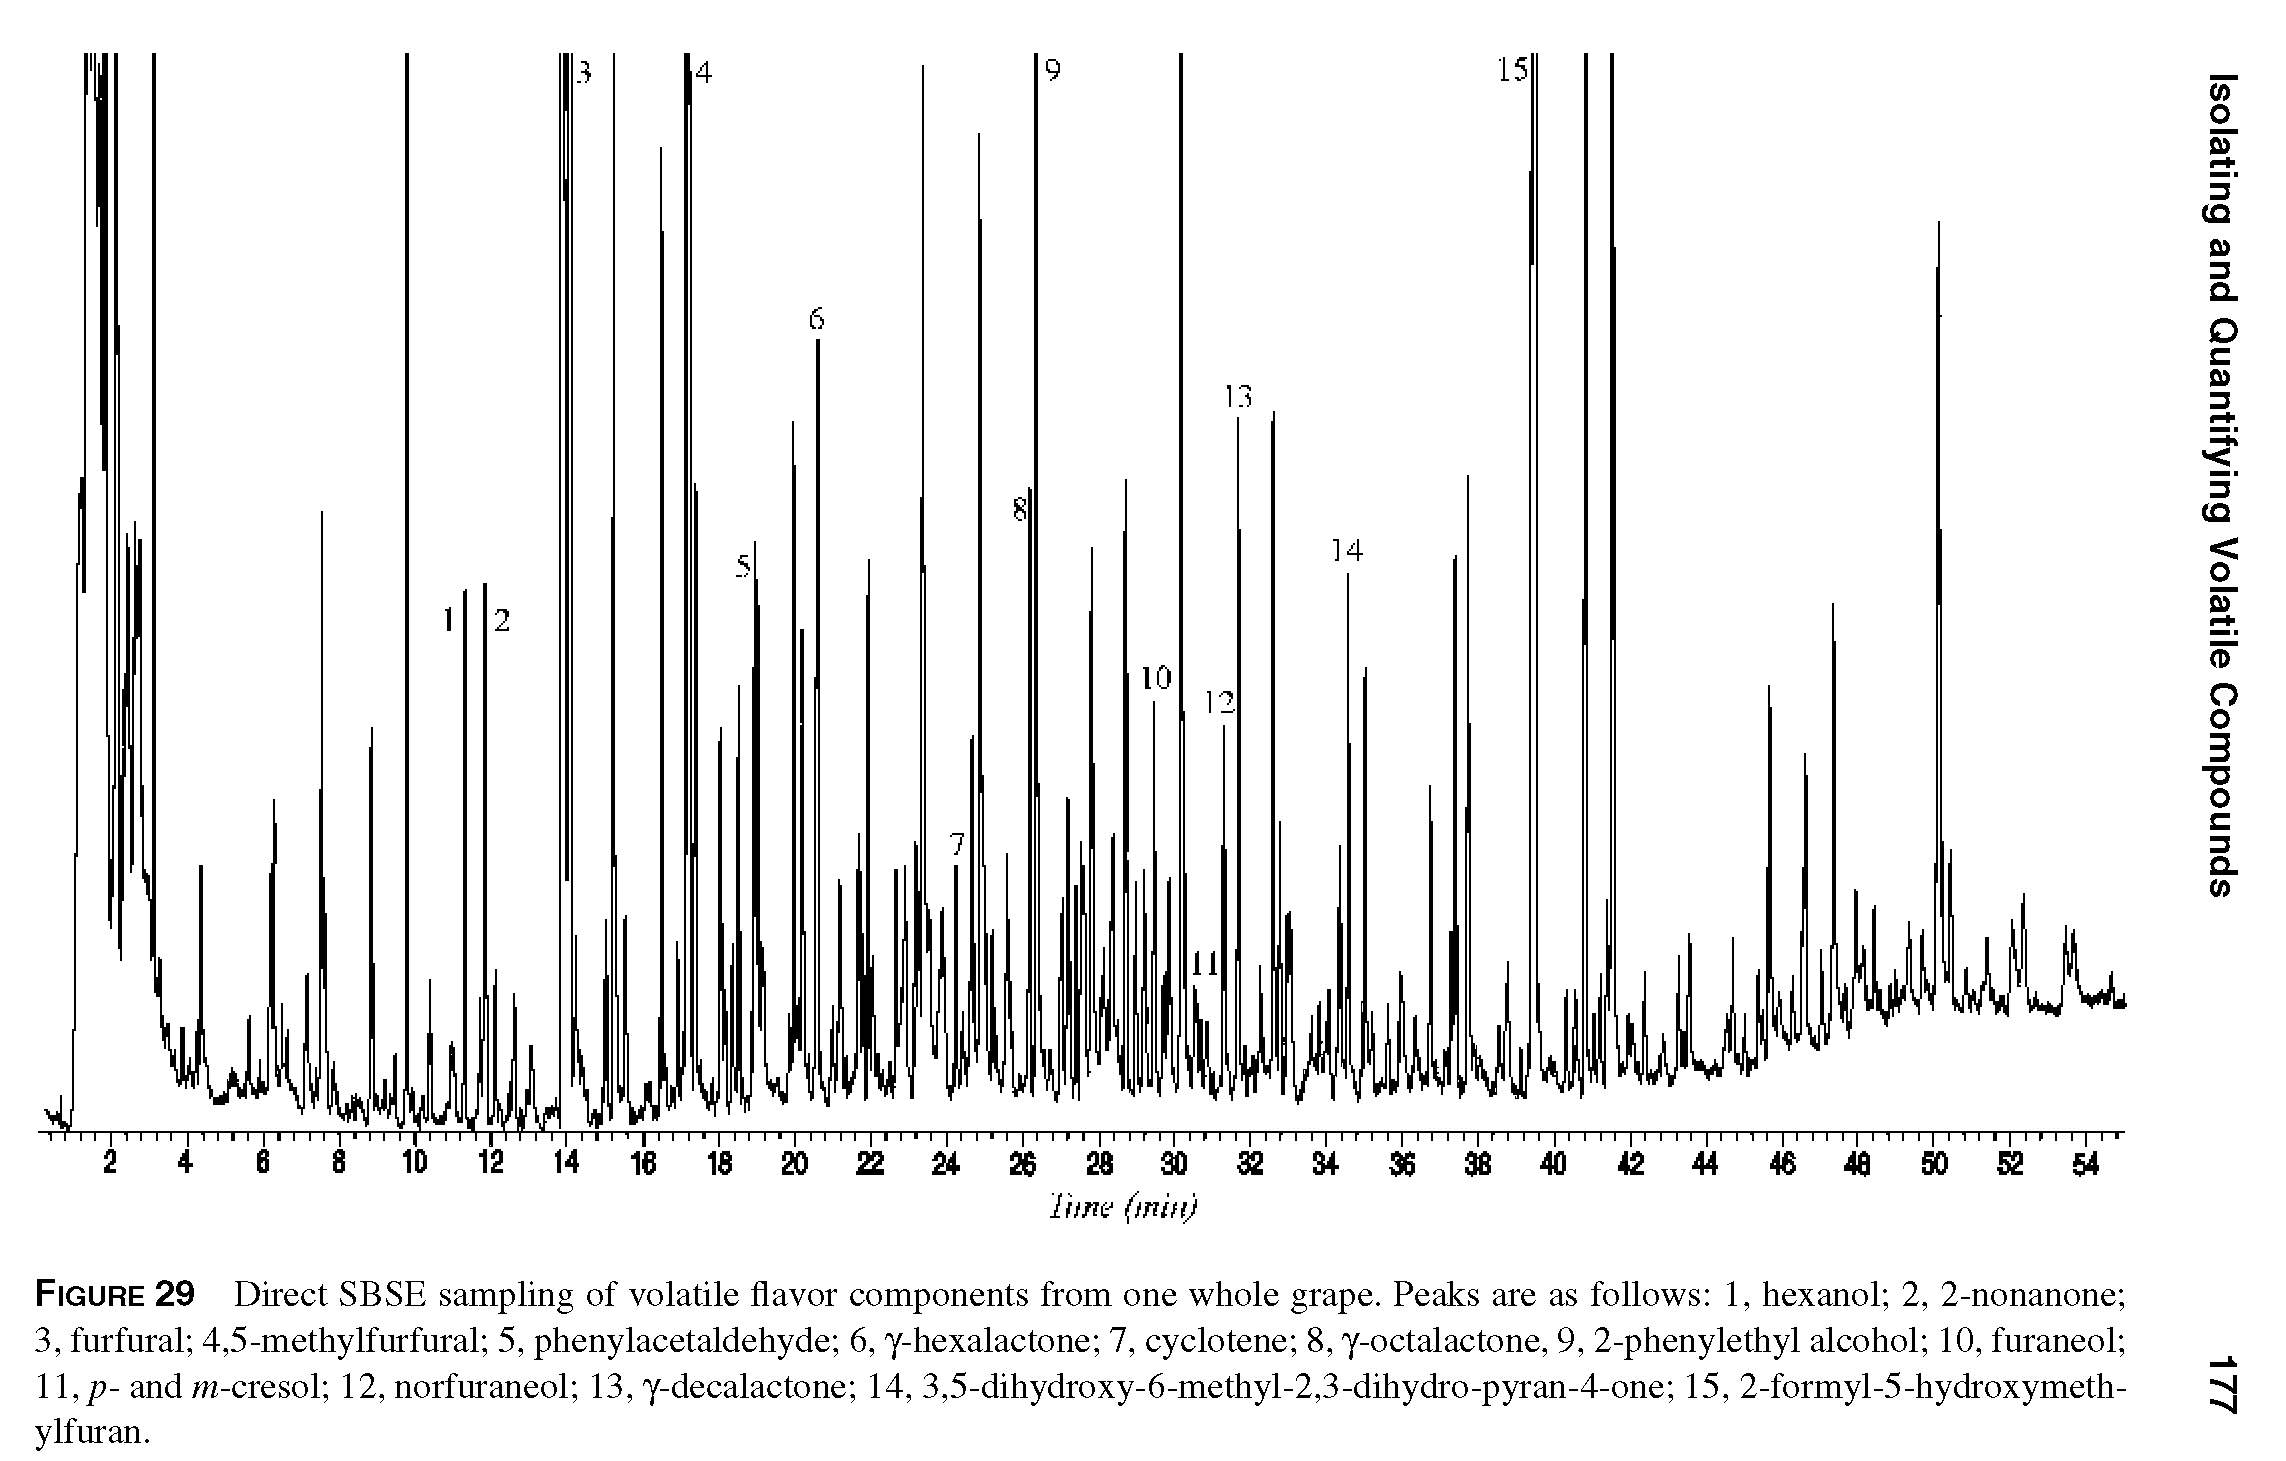 Figure 29 Direct SBSE sampling of volatile flavor components from one whole grape. Peaks are as follows 1, hexanol 2, 2-nonanone 3, furfural 4,5-methylfurfural 5, phenylacetaldehyde 6, y-hexalactone 7, cyclotene 8, y-octalactone, 9, 2-phenylethyl alcohol 10, furaneol , p- and m-cresol 12, norfuraneol 13, y-decalactone 14, 3,5-dihydroxy-6-methyl-2,3-dihydro-pyran-4-one 15, 2-formyl-5-hydroxymeth-ylfuran.